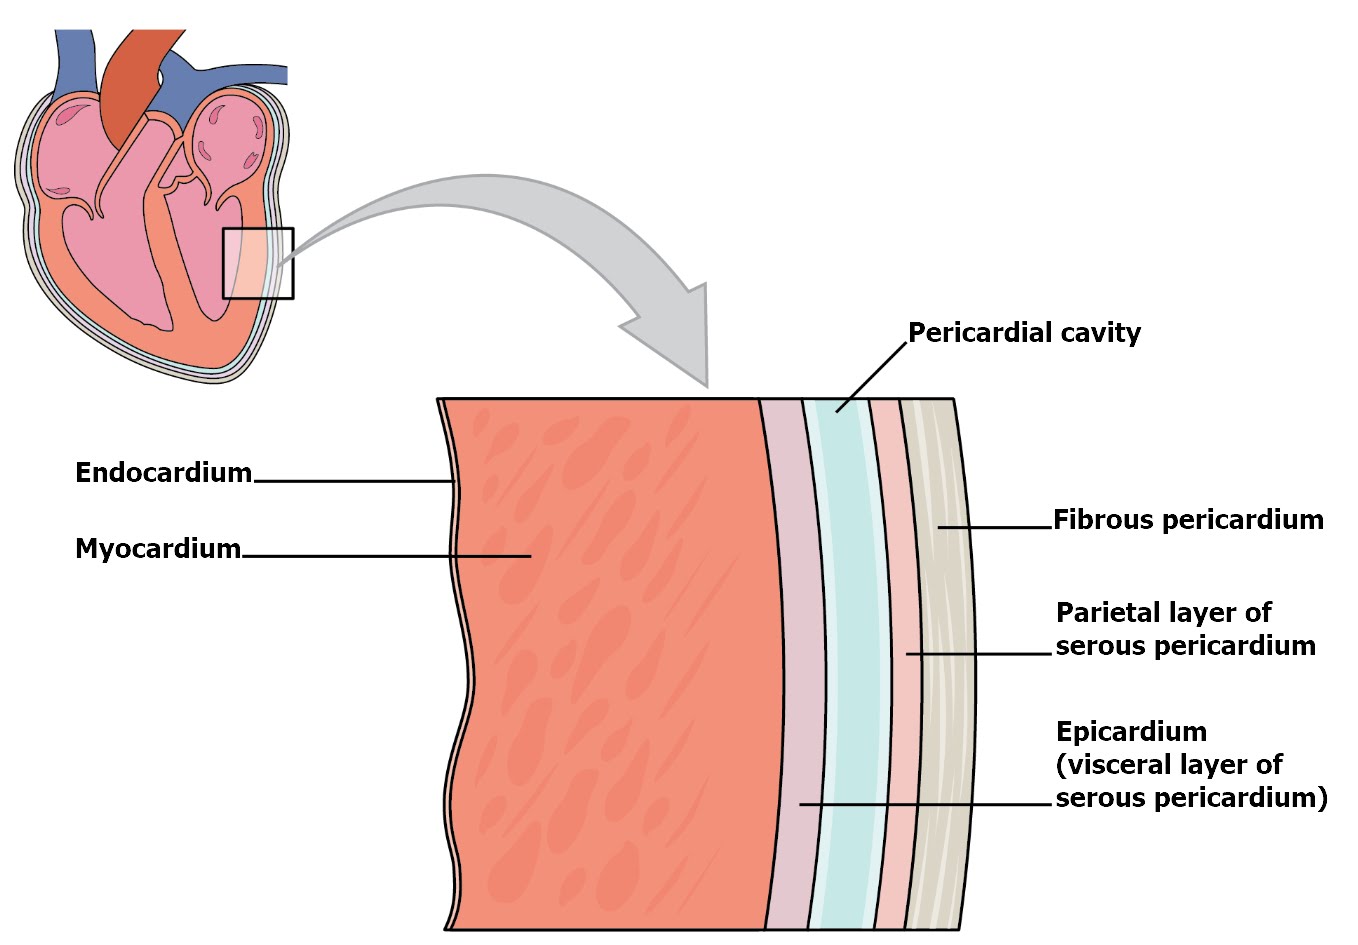 Layers of the Heart Wall and Pericardium (from deep to superficial: Endocardium, Myocardium, Epicardium, Pericardial cavity filled with Serous Fluid, Parietal Pericardium, Fibrous Pericardium)